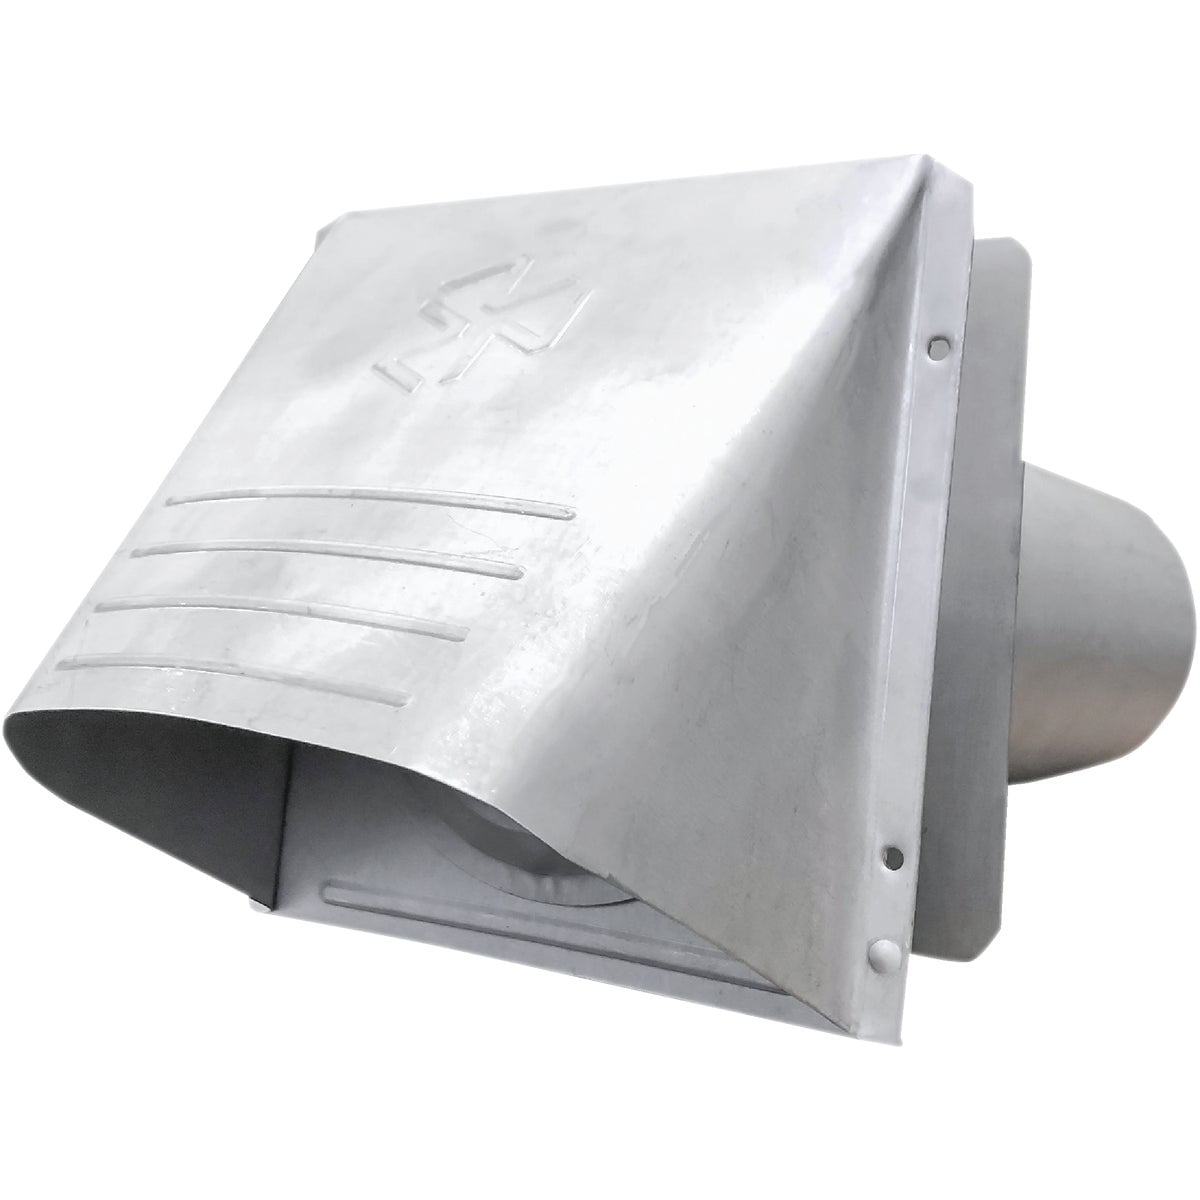 Dryer Vent GVH4NR Wide Mouth Galvanized Vent Hood with Pipe 4” Silver 